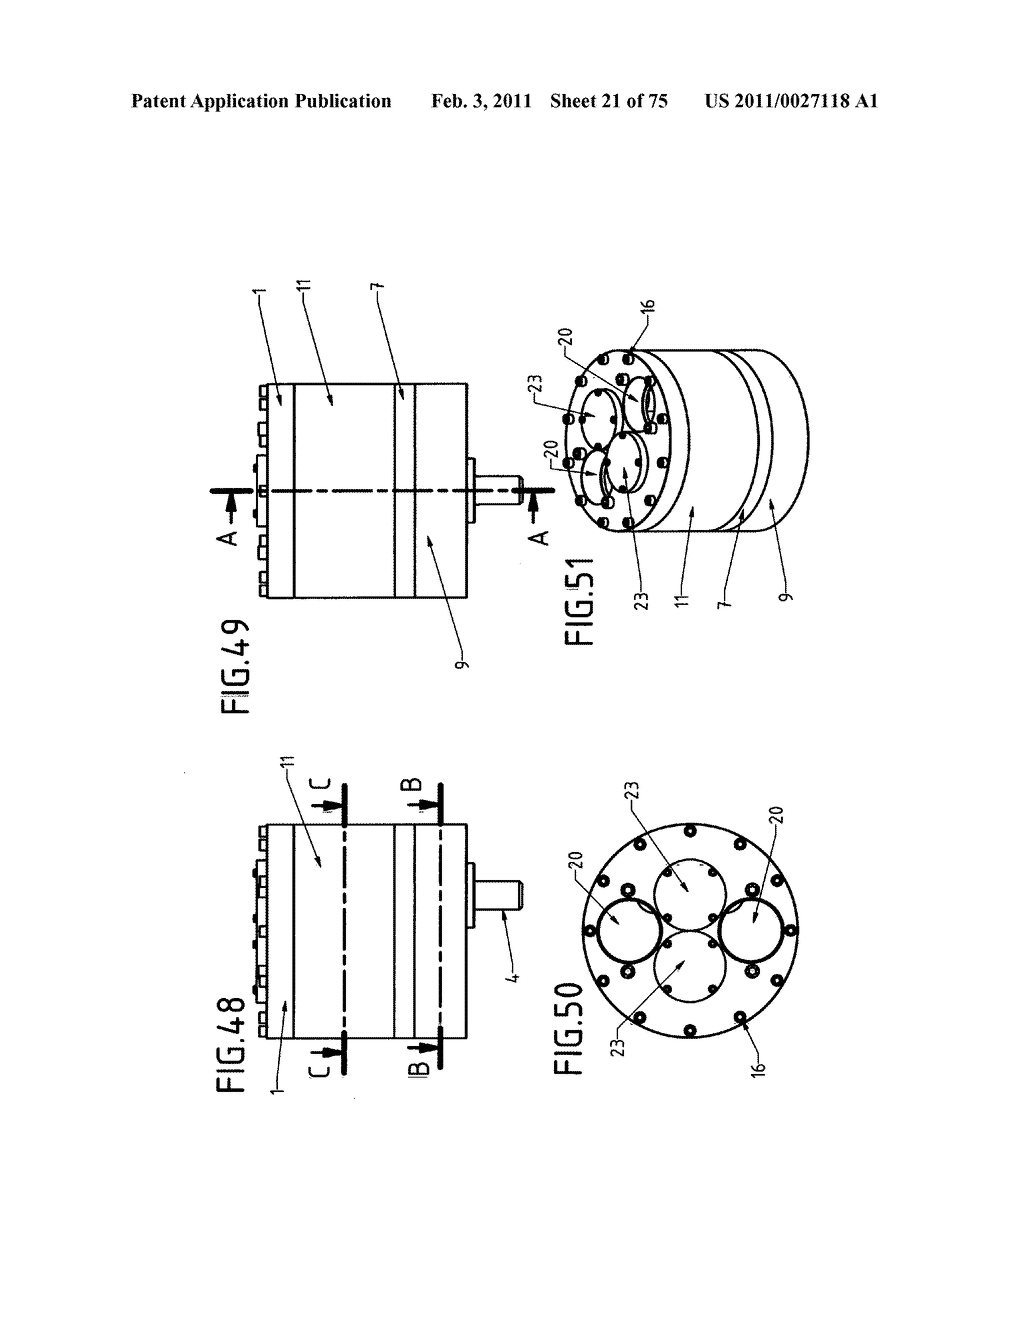 DEVICE WITH ROTARY PISTONS THAT CAN BE USED AS A COMPRESSOR, A PUMP, A VACUUM PUMP, A TURBINE, A MOTOR AND AS OTHER DRIVING AND DRIVEN HYDRAULIC-PNEUMATIC MACHINES - diagram, schematic, and image 22